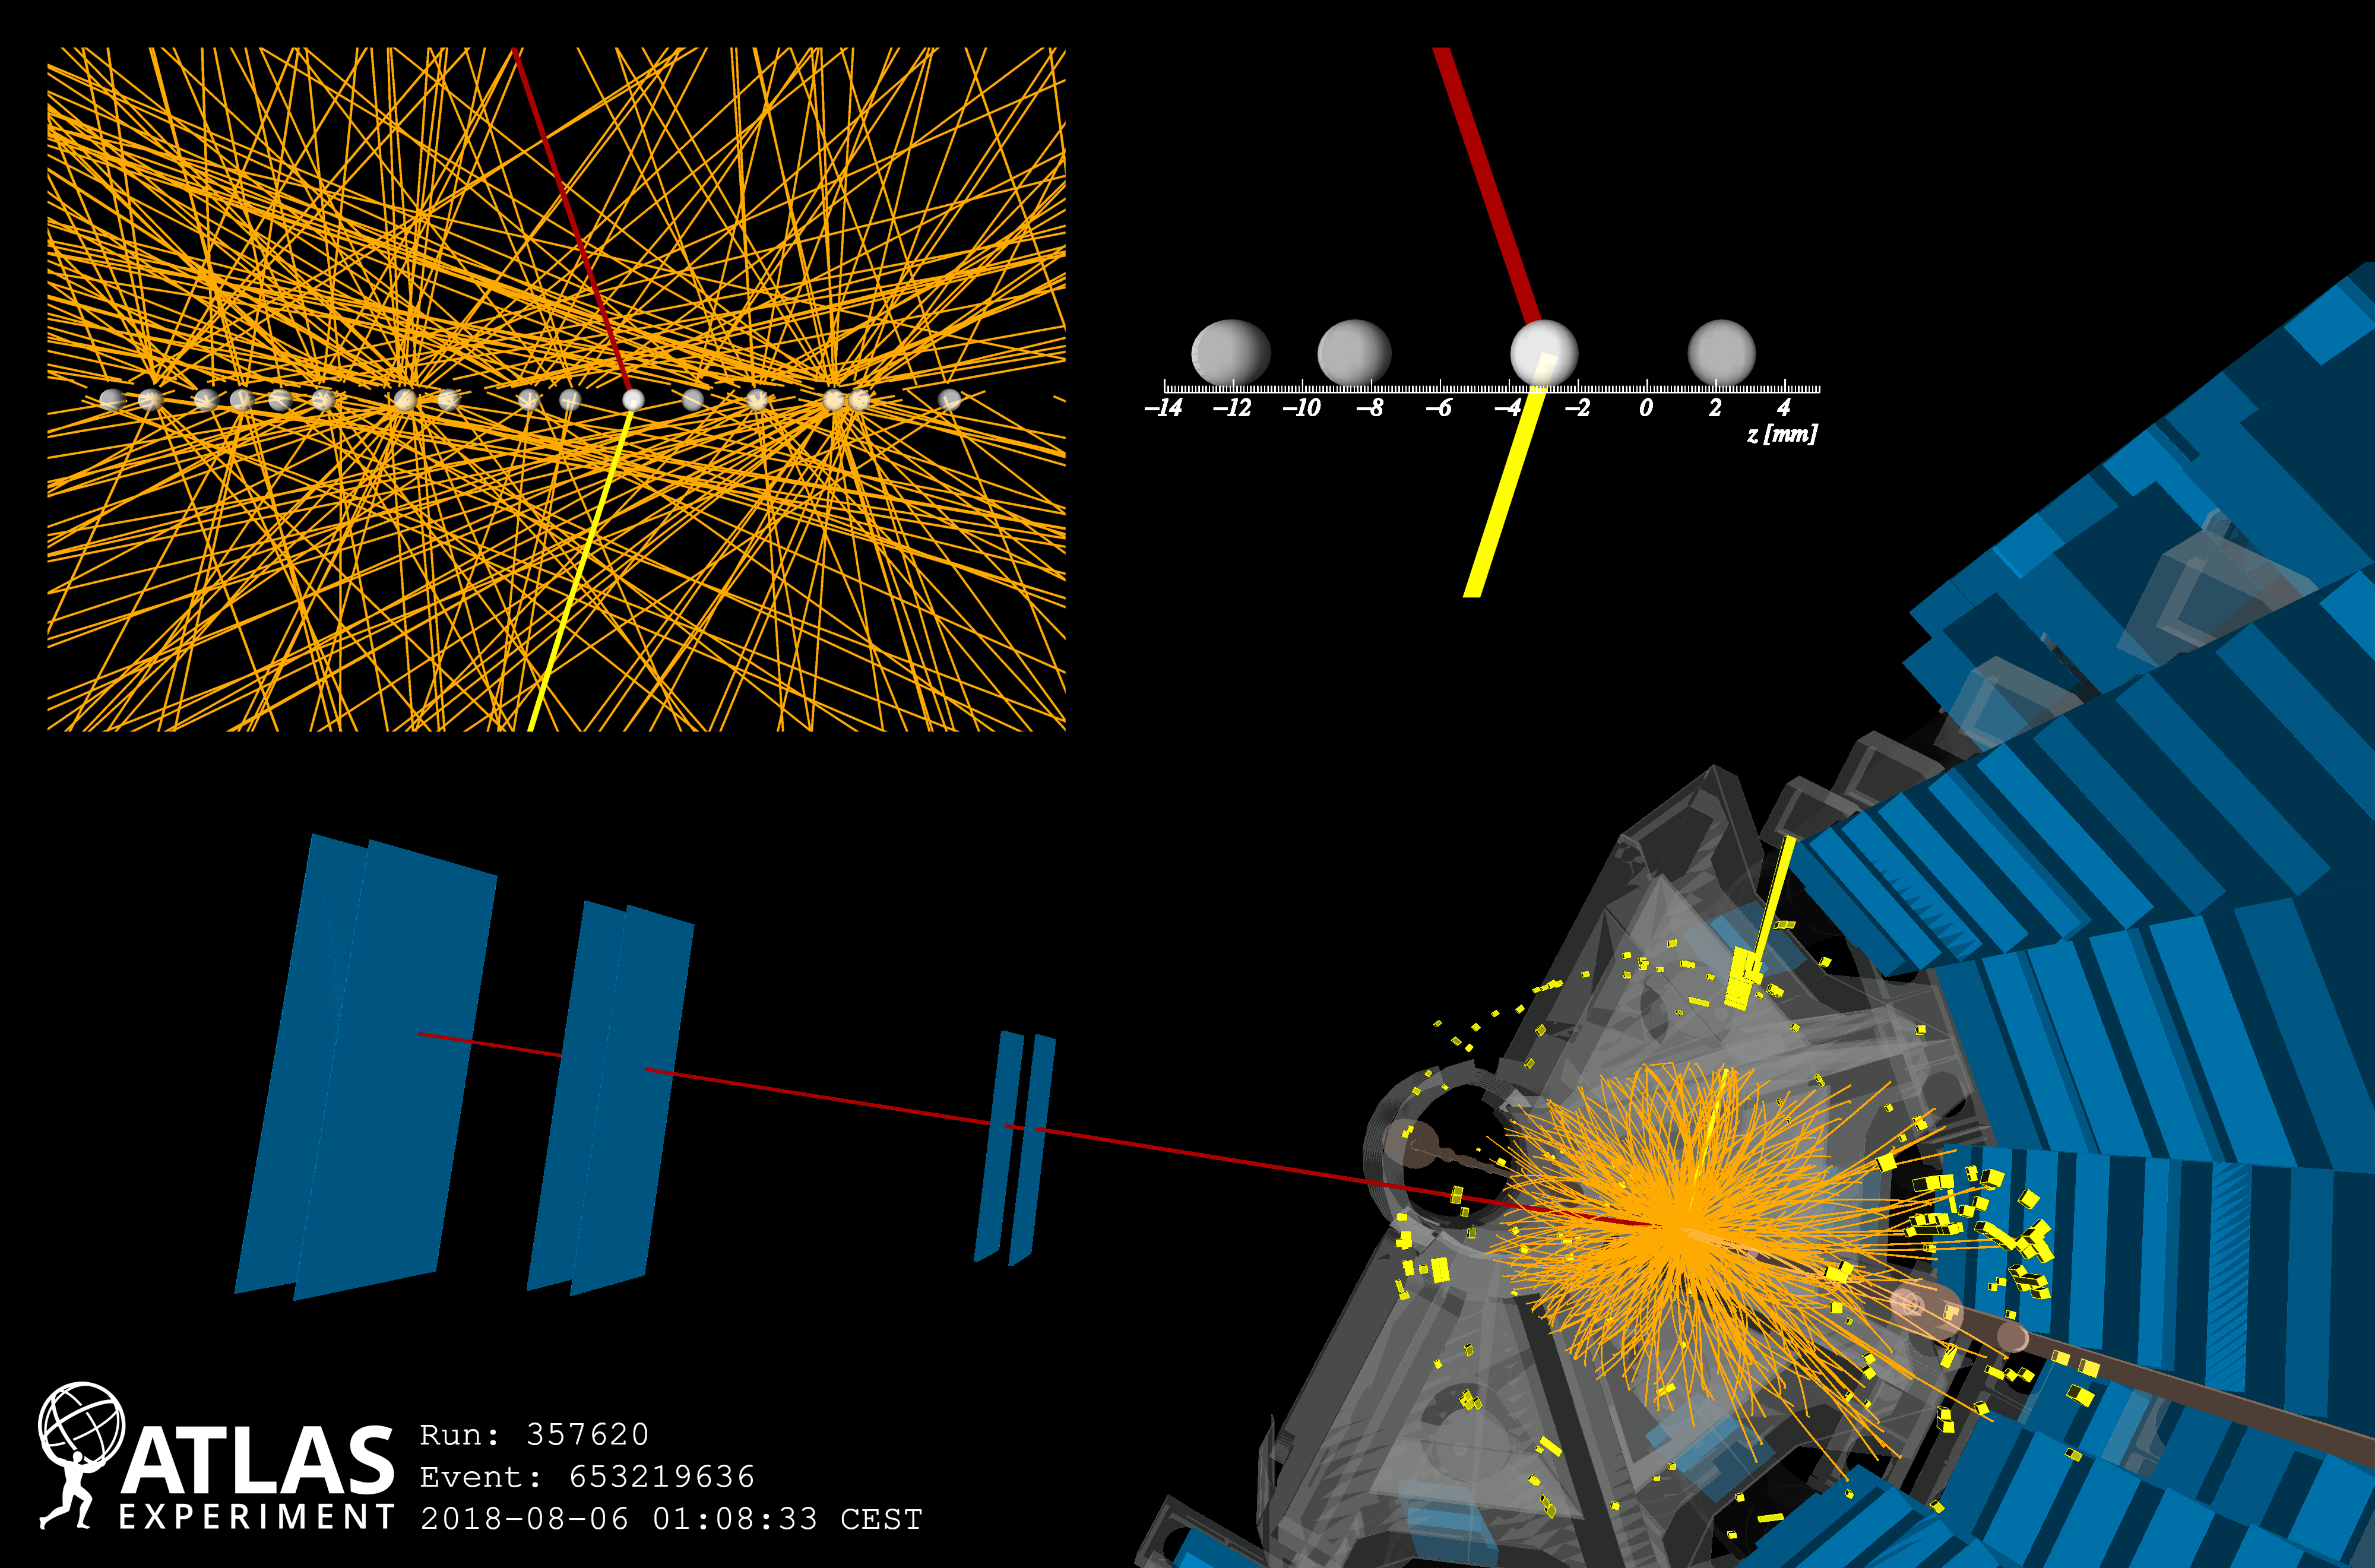 Image - This image shows a reconstruction of a particle interactions event at CERN’s ATLAS detector that produced W bosons from photons, particles of light. (Credit: ATLAS collaboration)